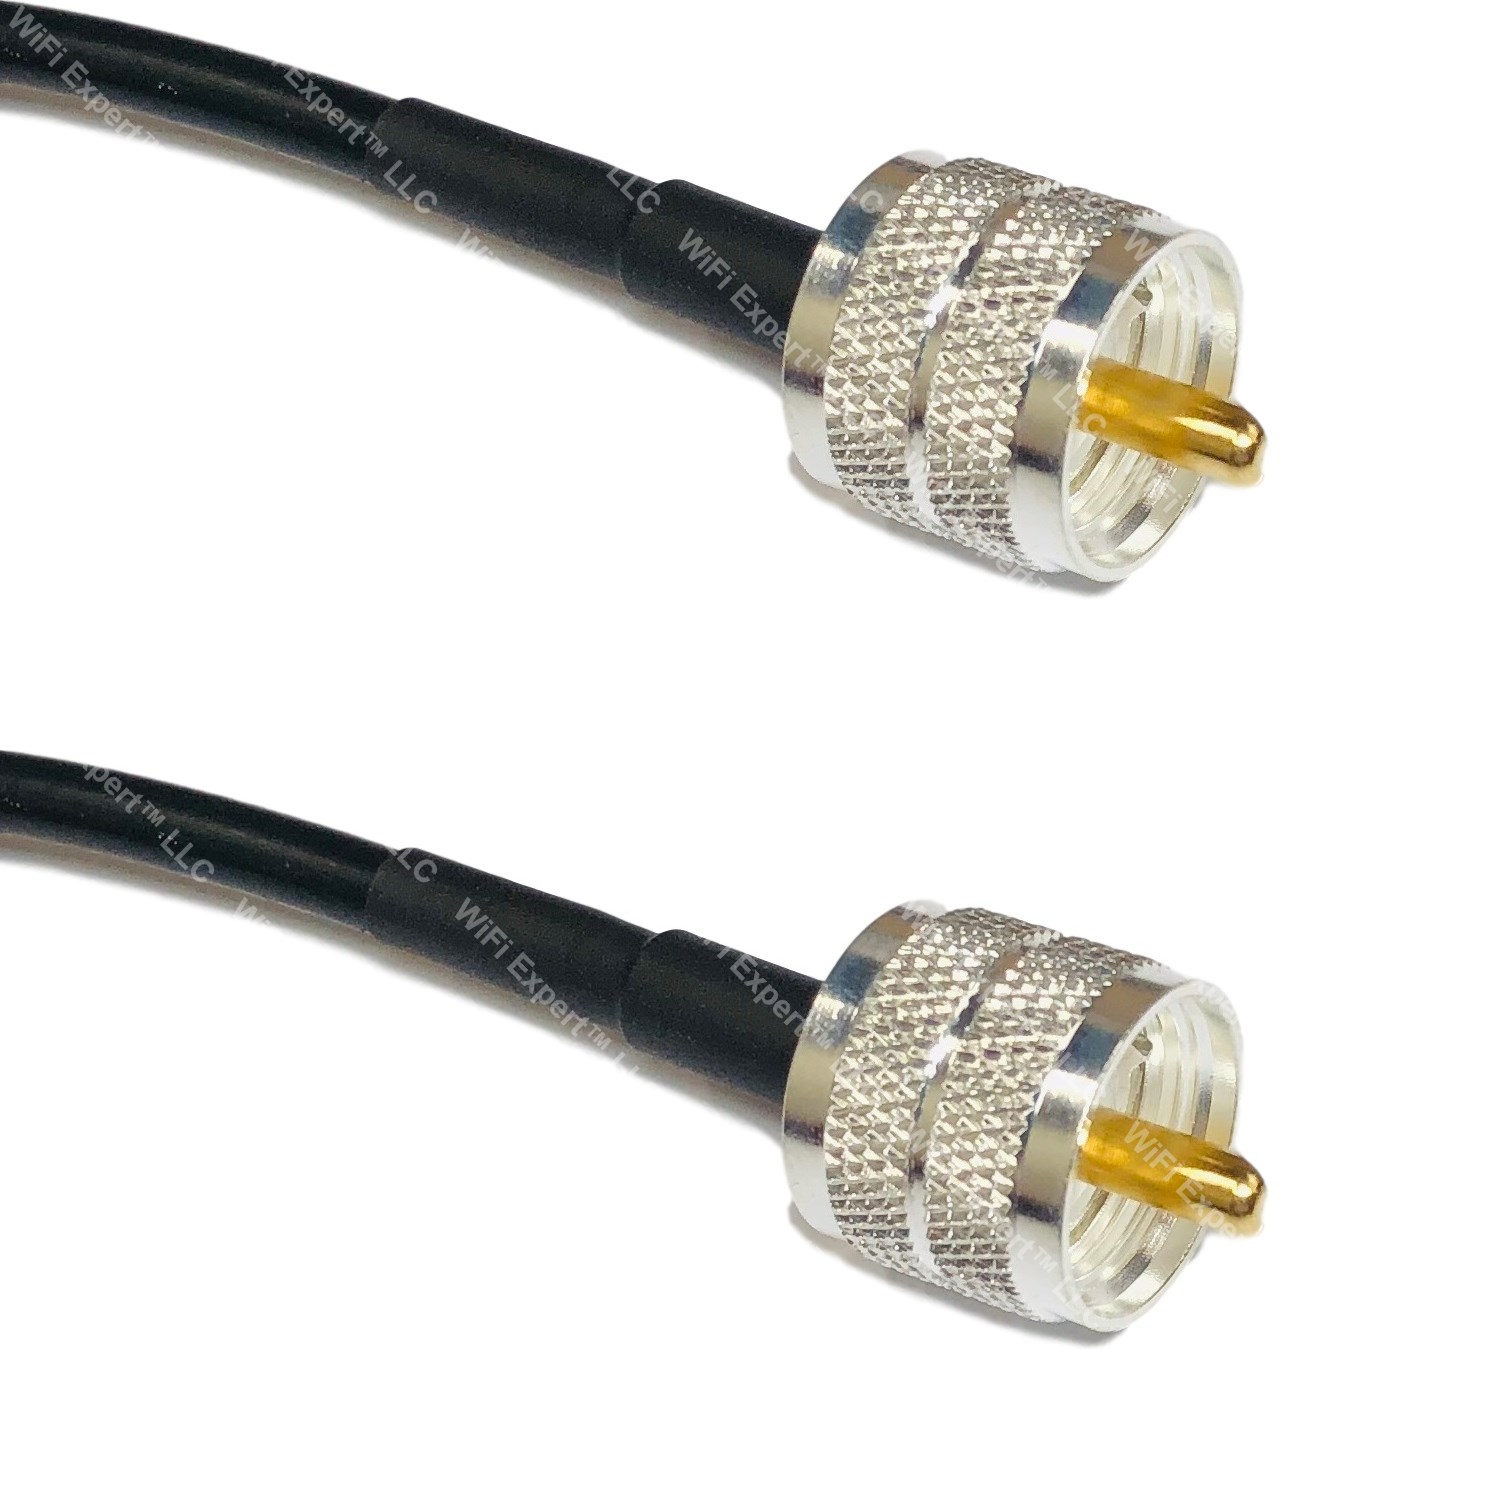 CB Radio Antenna VHF Coax Cable 50ft PL-259 Connectors